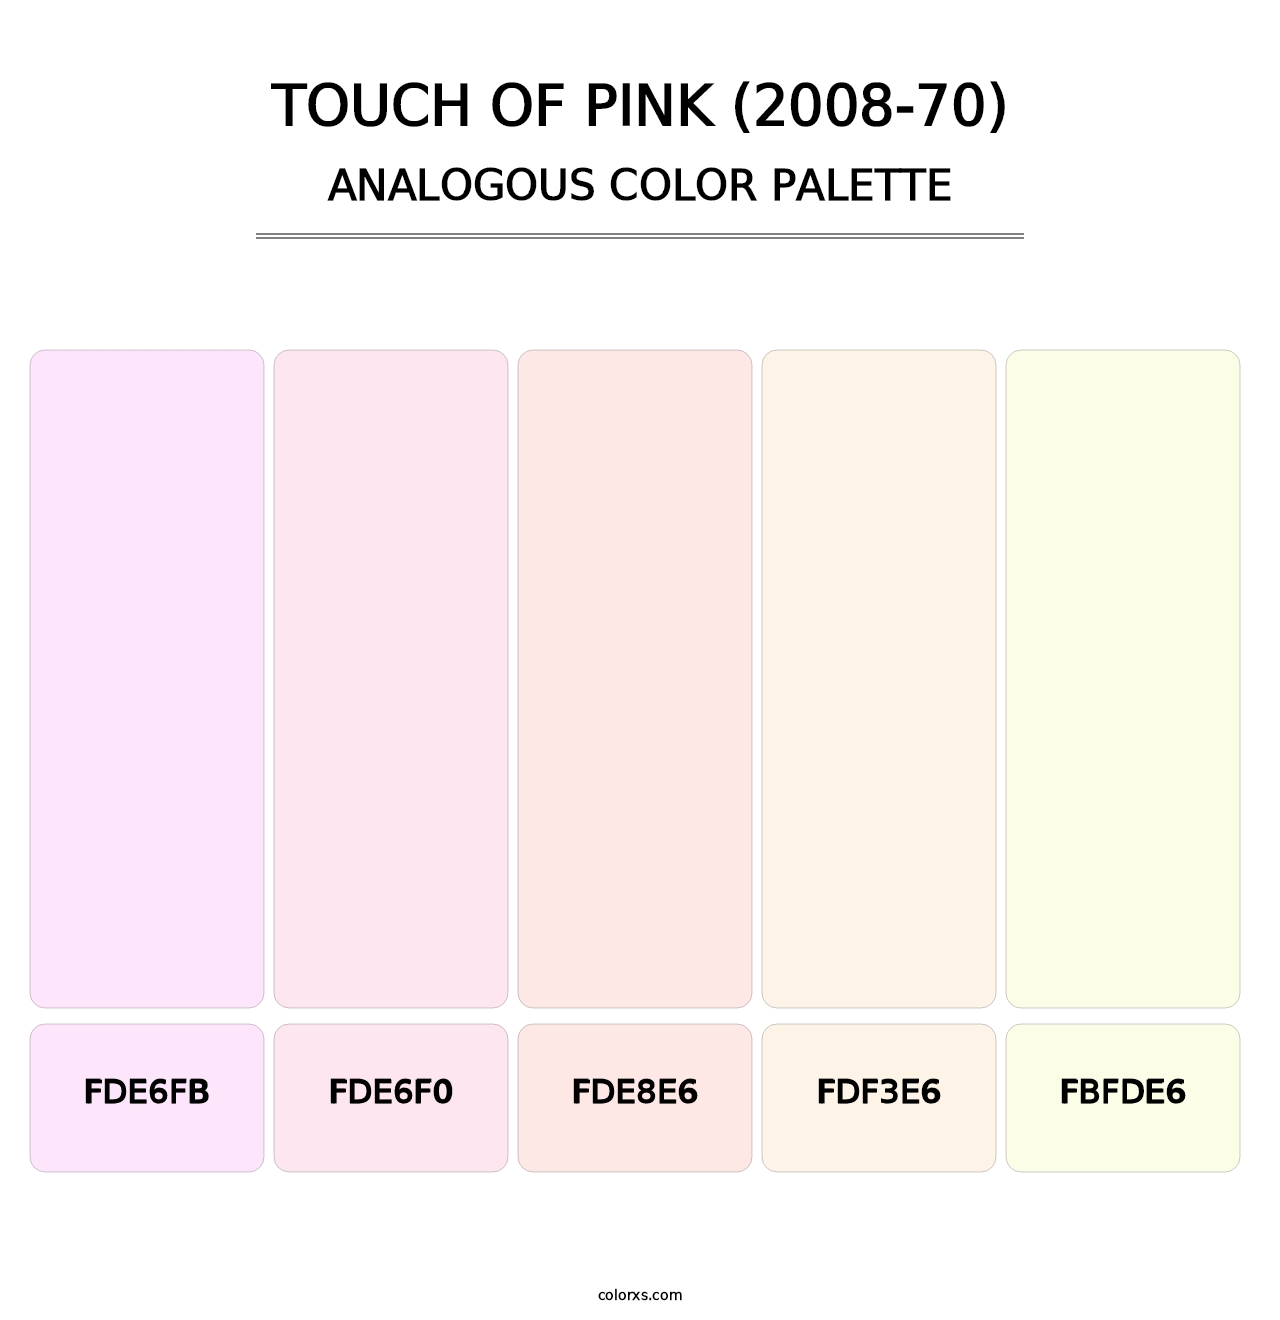 Touch of Pink (2008-70) - Analogous Color Palette